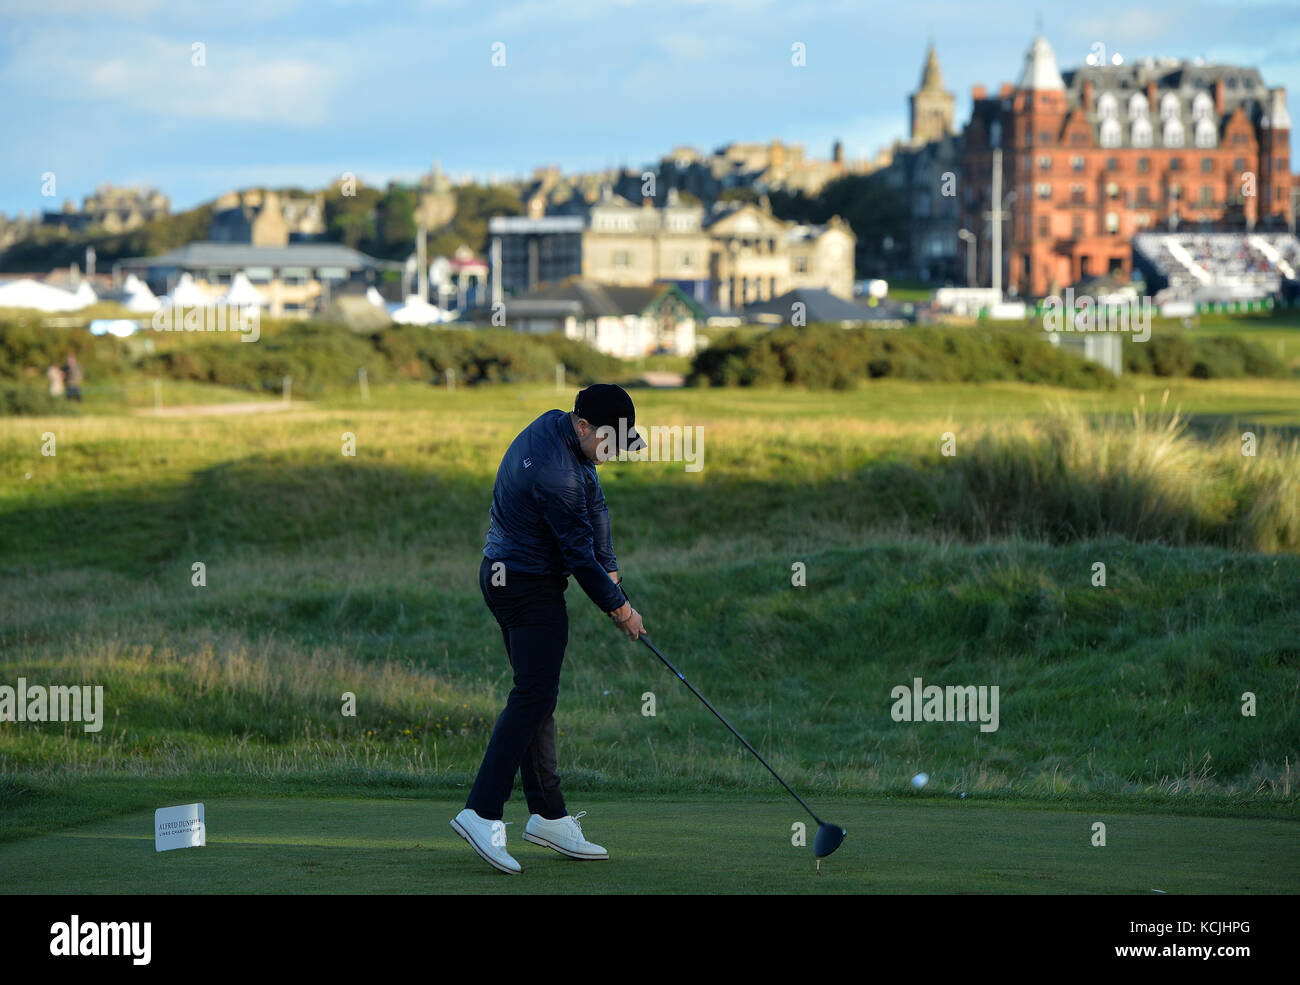 Ronan Keating plays his tee shot at the 17th hole during day one of the Alfred Dunhill Links Championship at St Andrews, Carnoustie and Kingsbarns. Stock Photo